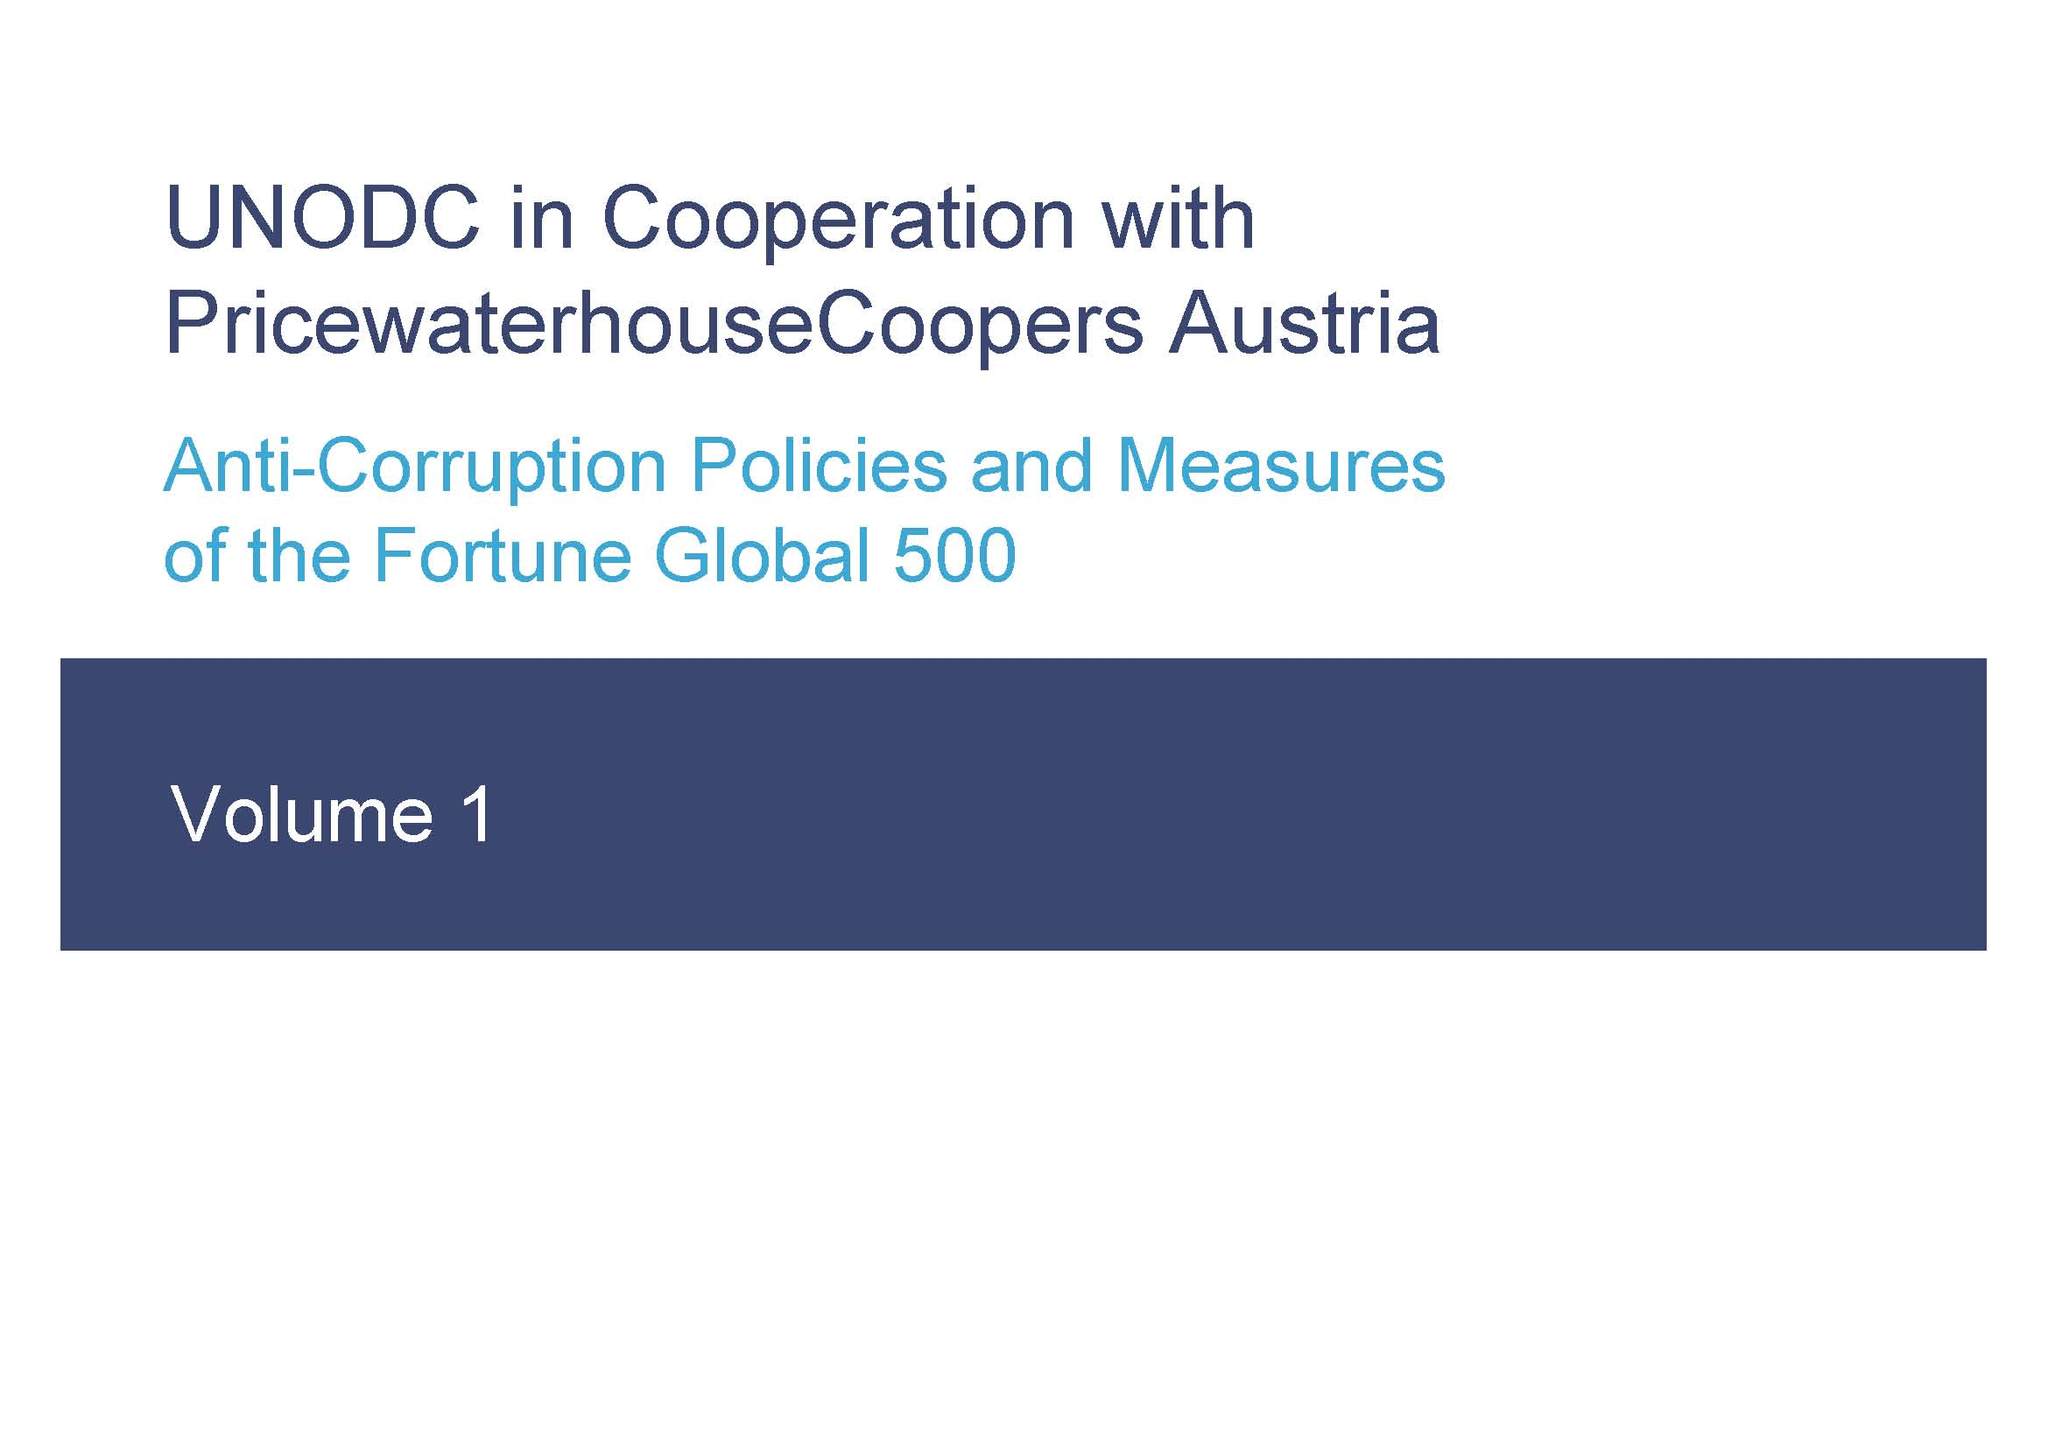 Anti-Corruption Policies and Measures of the Fortune Global 500